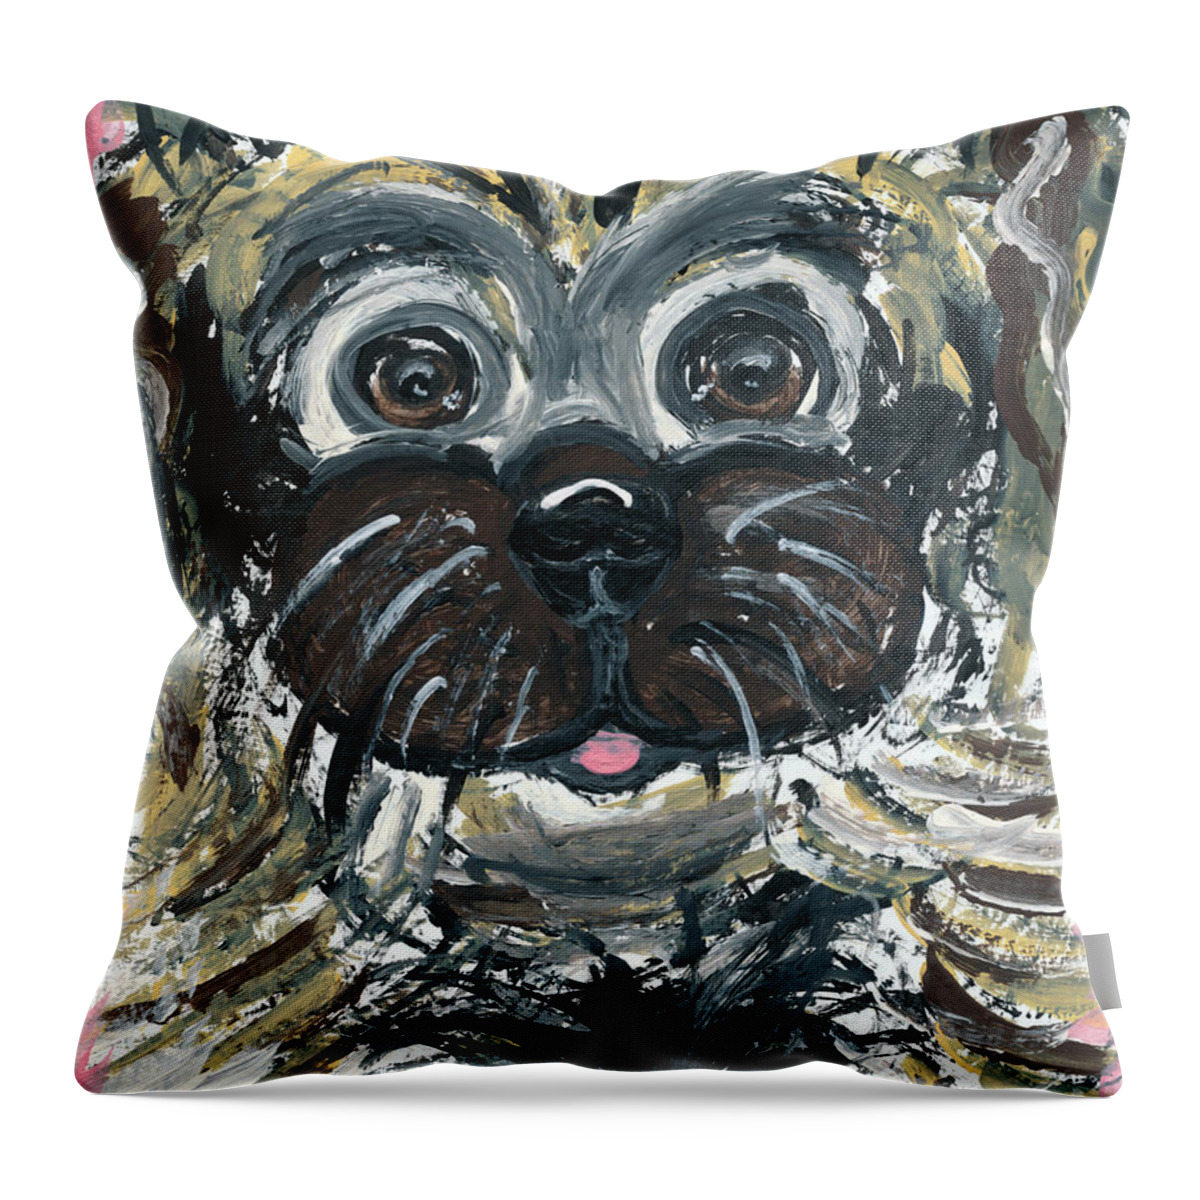 Pekingese Throw Pillow featuring the painting Baby Oh Baby by Ania M Milo